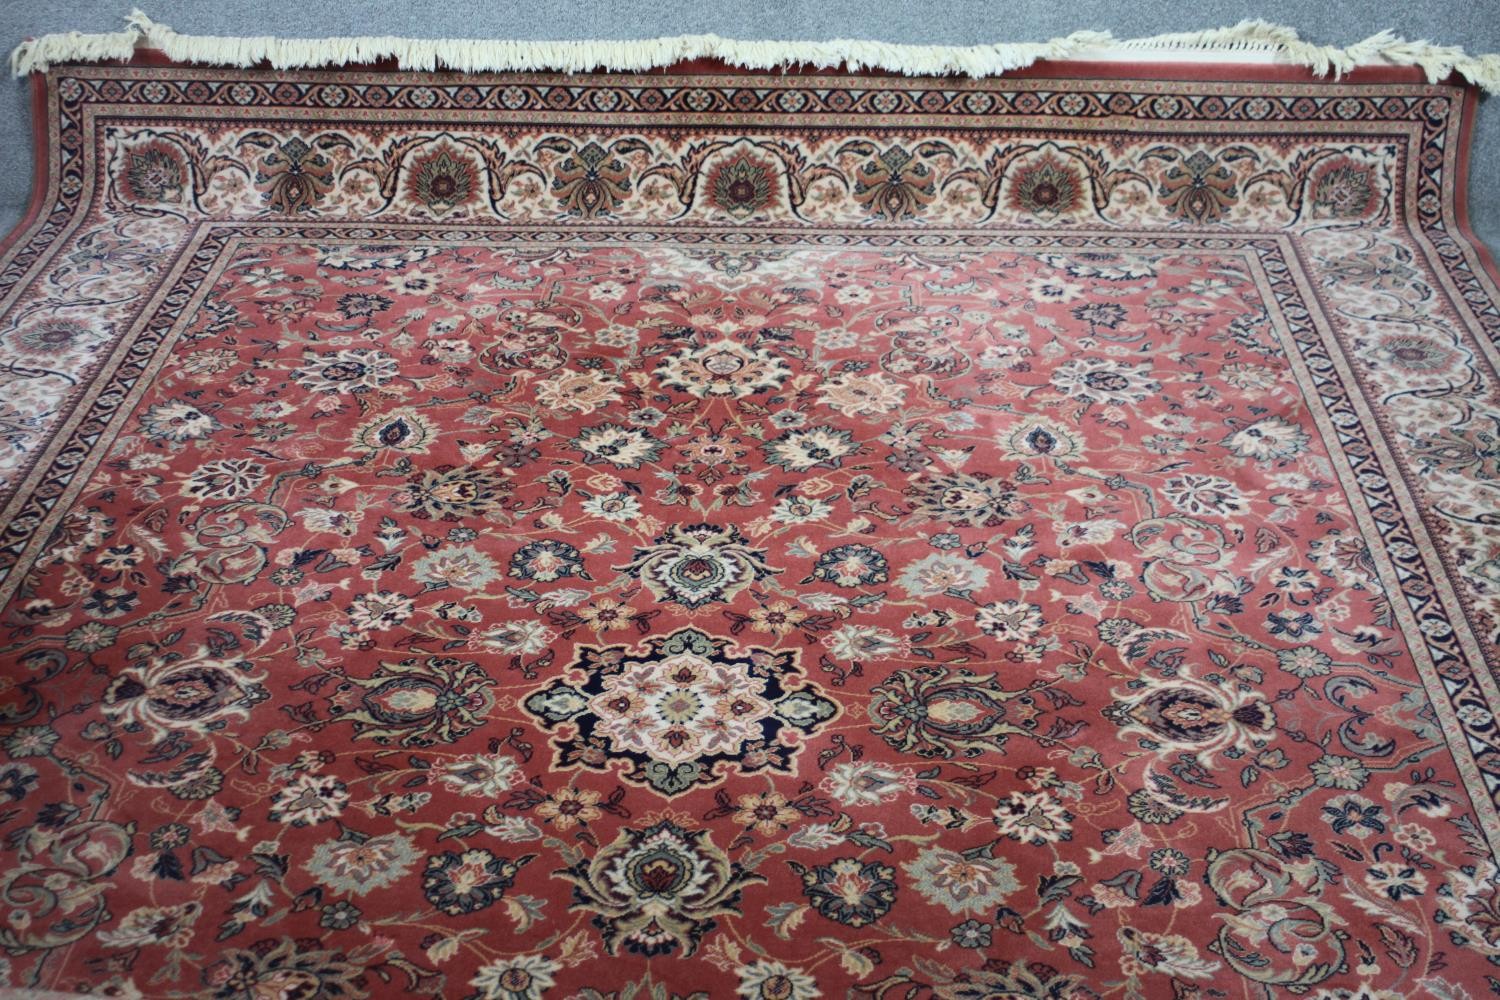 A Keshan motif woollen carpet with central medallion and trailing foliate pattern on a burgundy